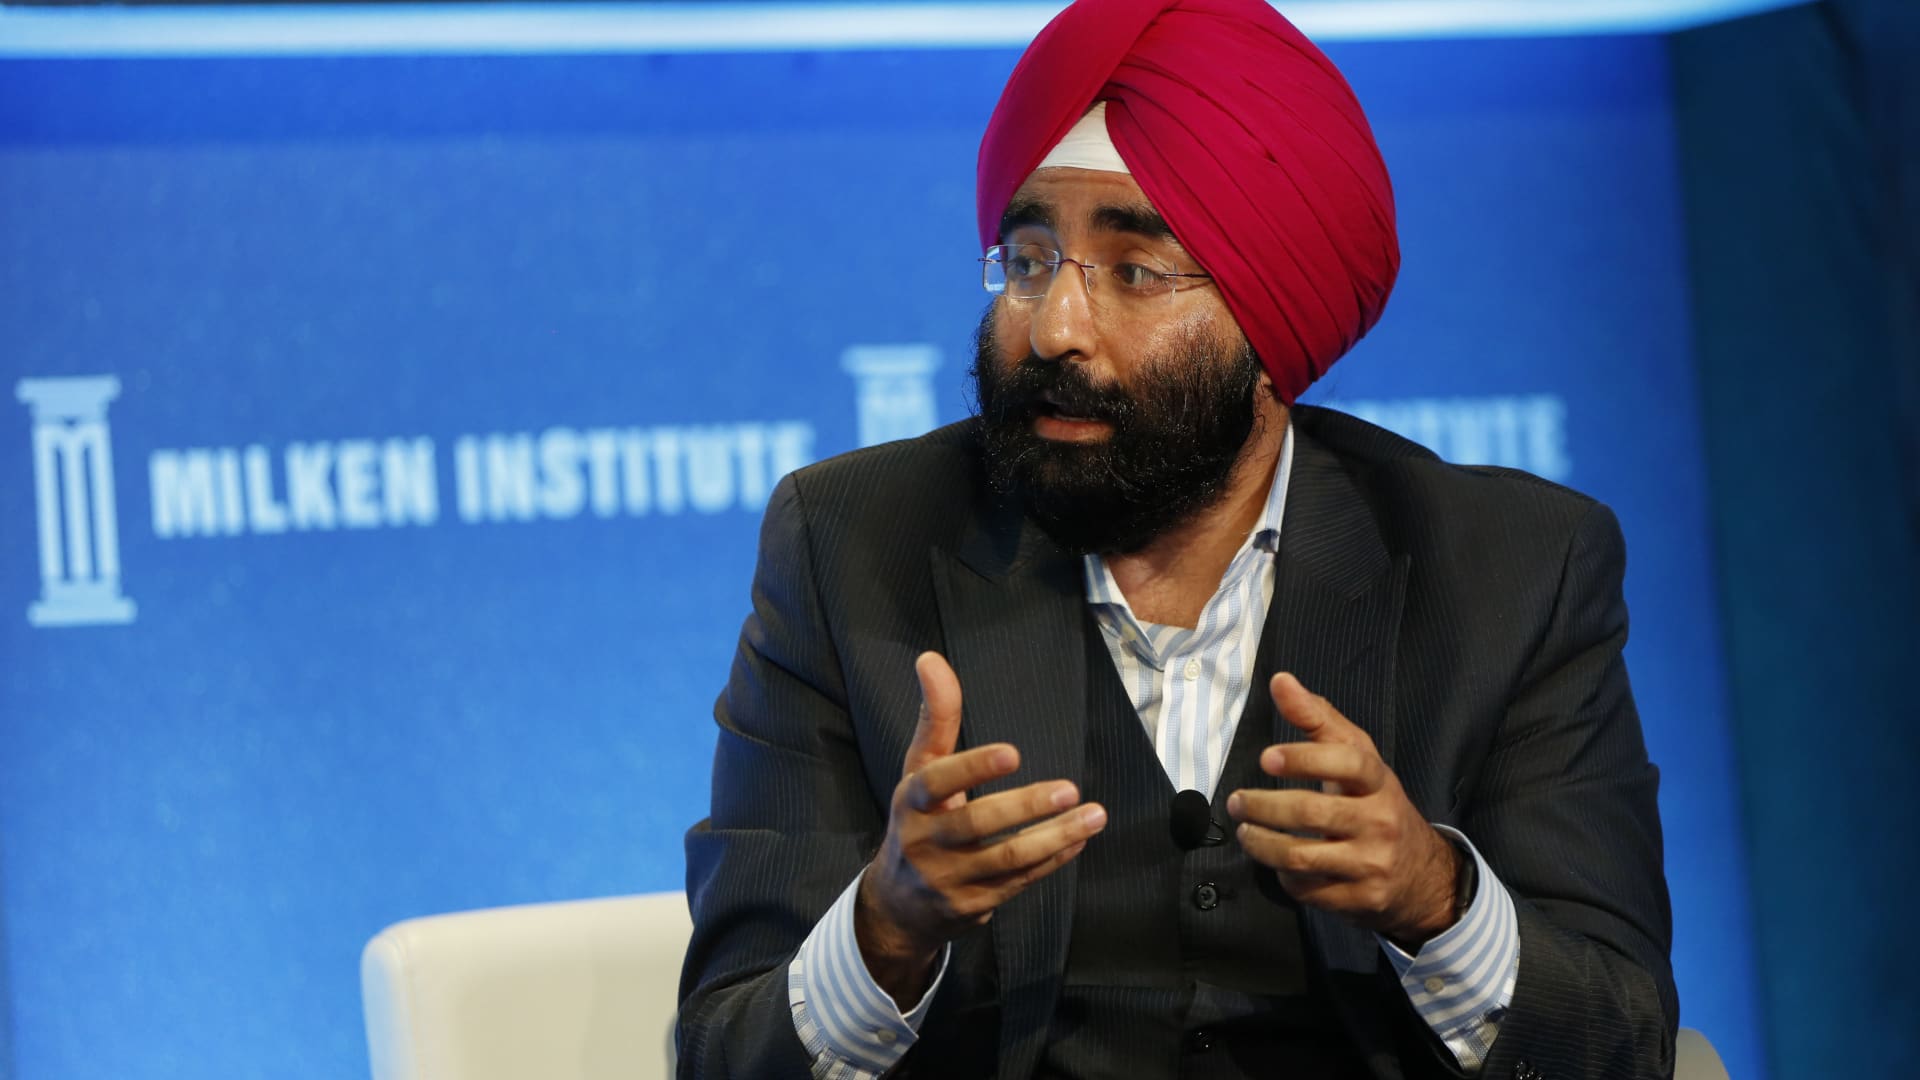 Jagdeep Singh Bachher, chief investment officer at the University of California. The university divested from fossil-fuel holdings and invested $1 billion in clean-energy projects.